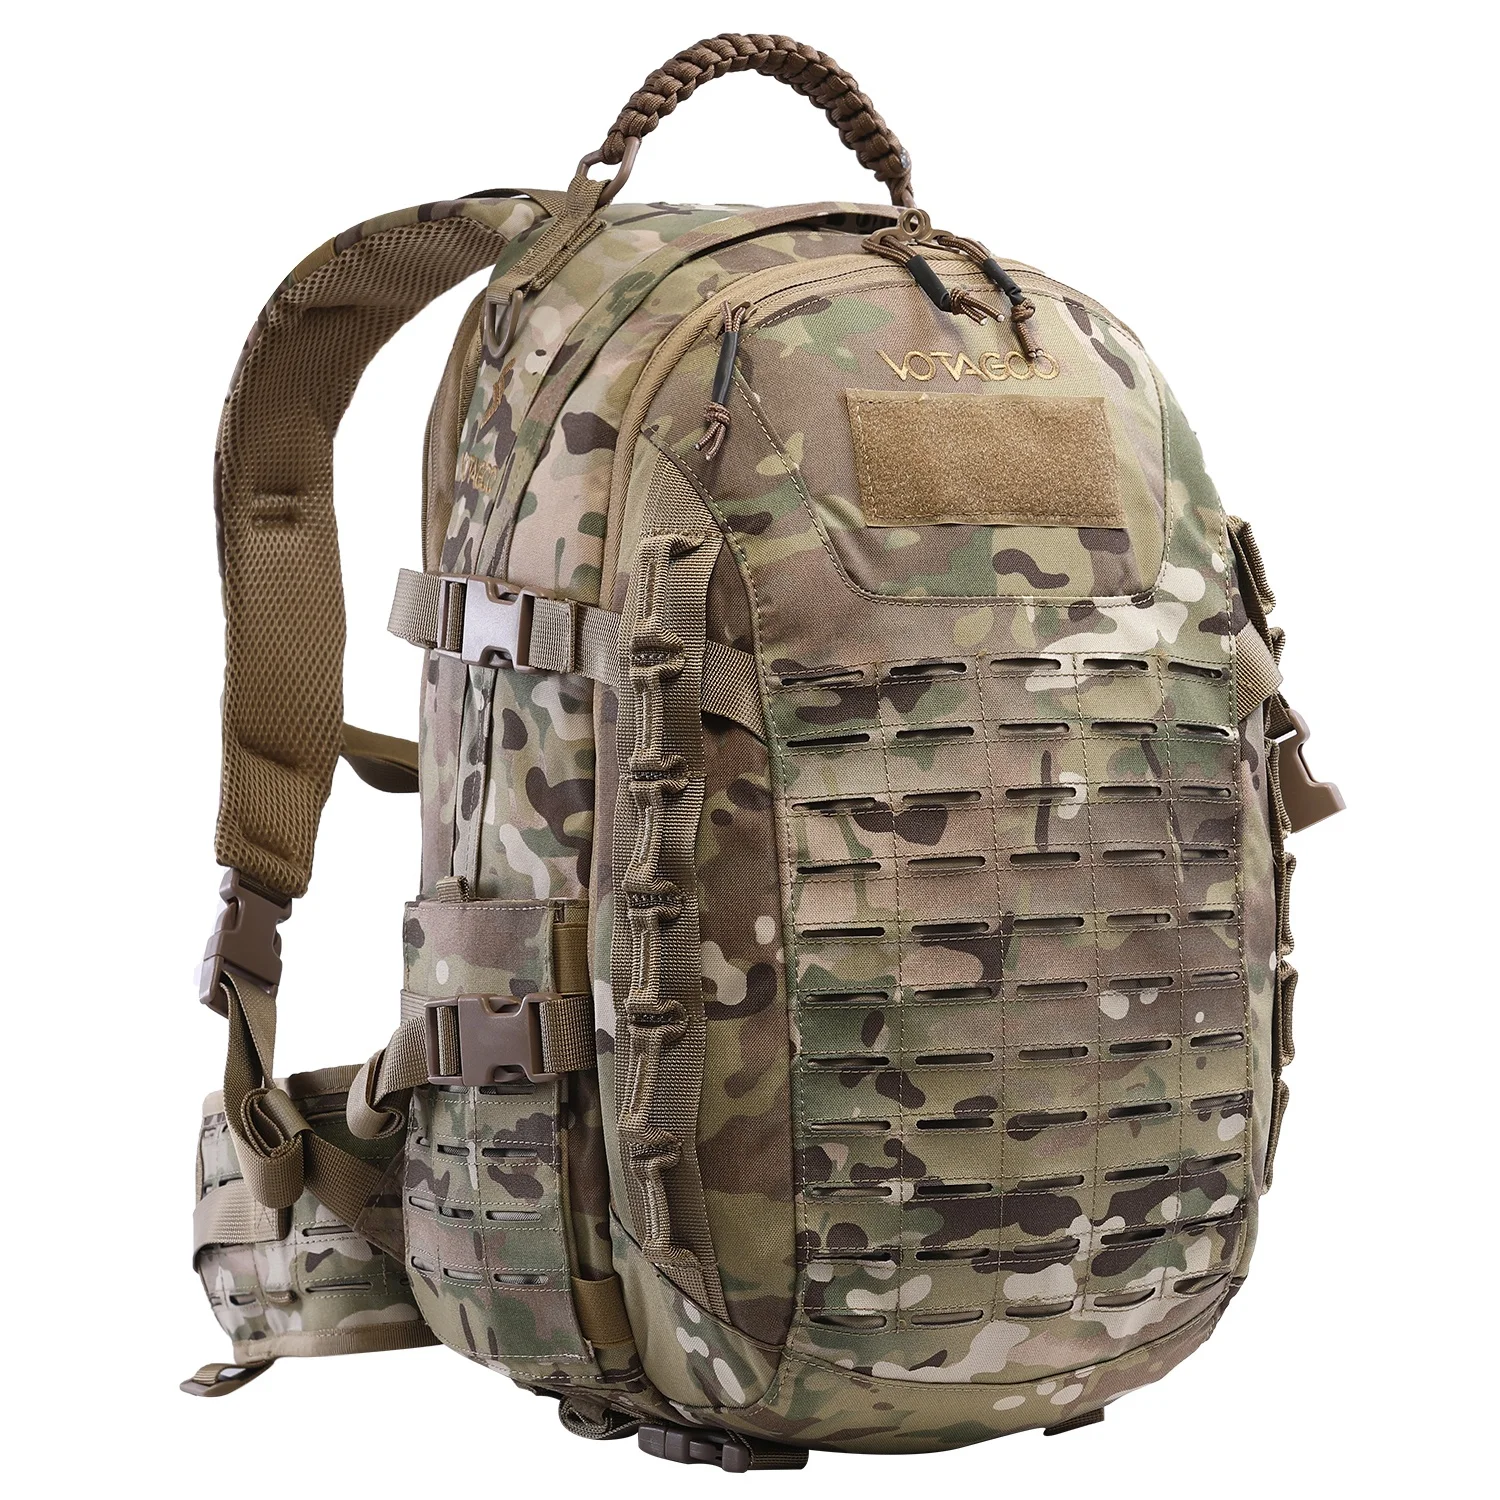 New Men Military Tactical Sling Bag Assault Large Backpack Army Molle Waterproof 